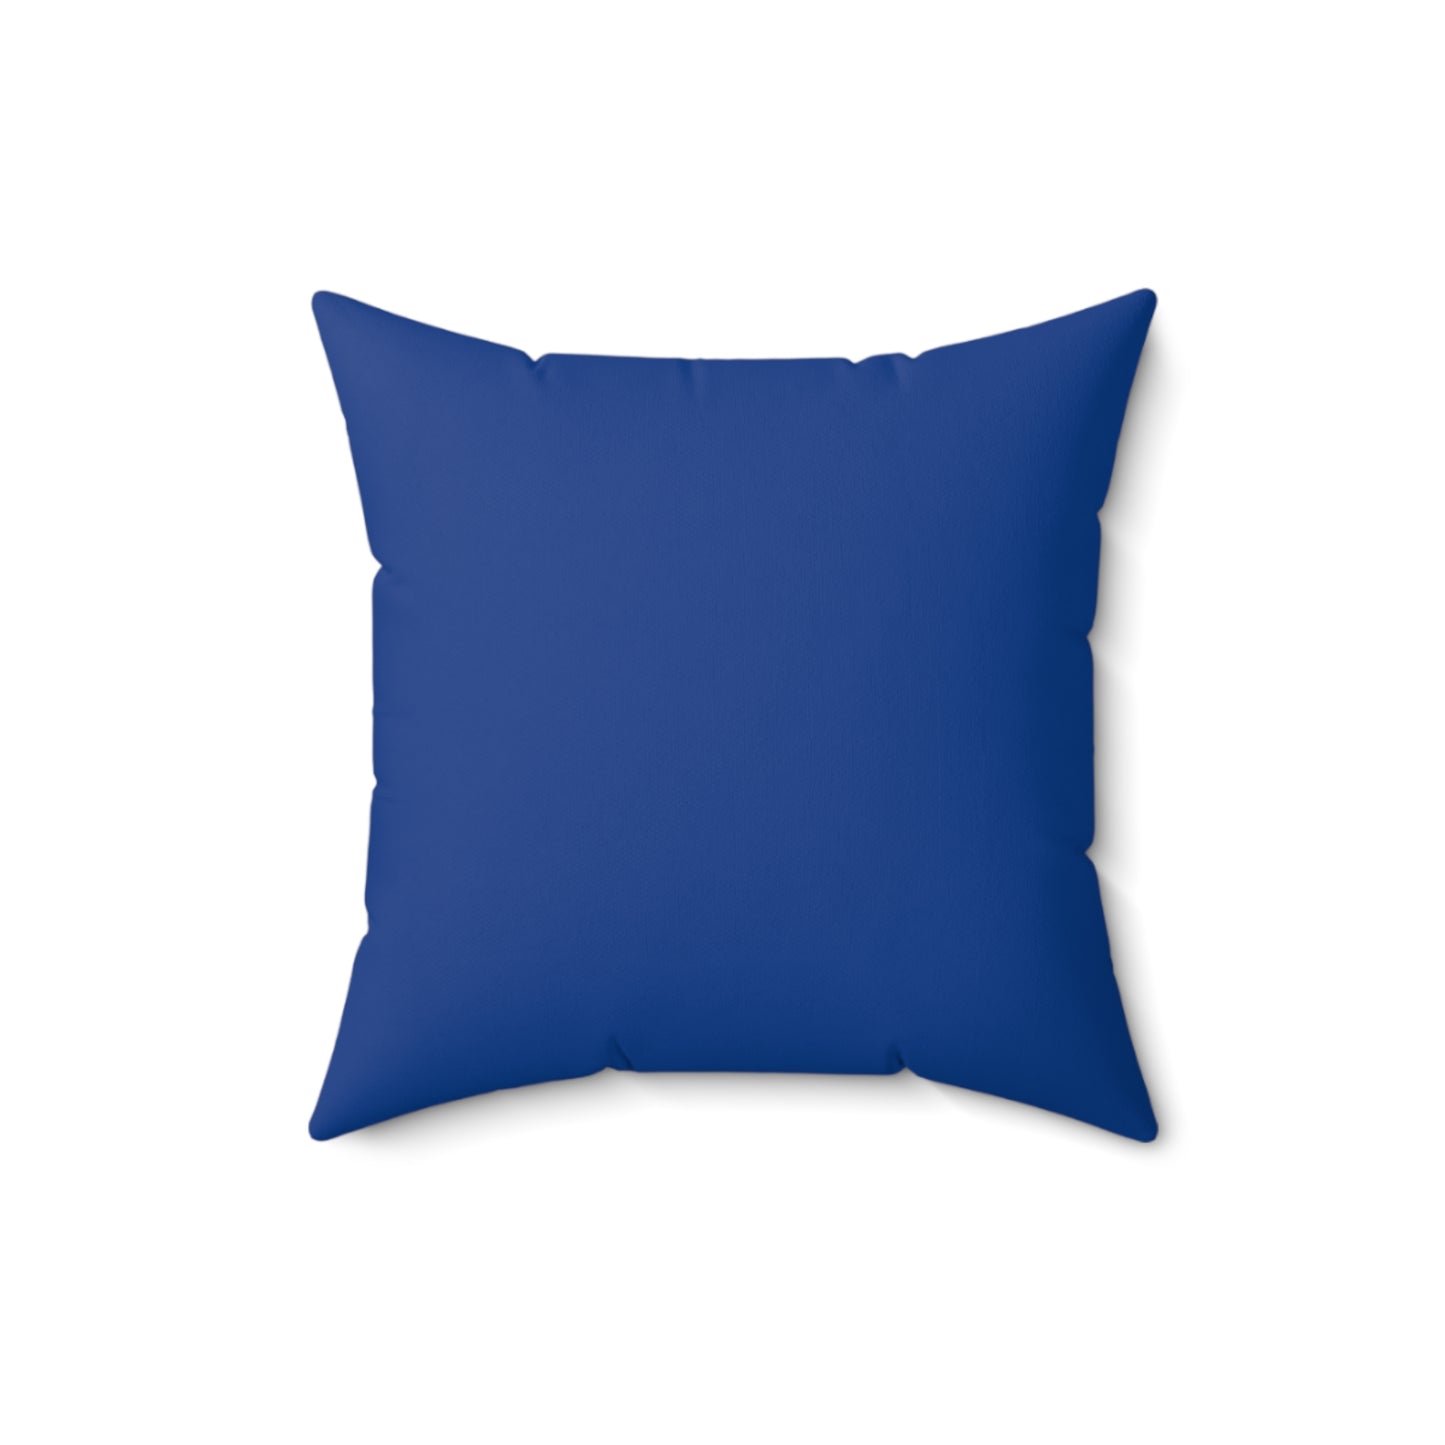 Polyester Square Pillow- Glasgow River Clyde